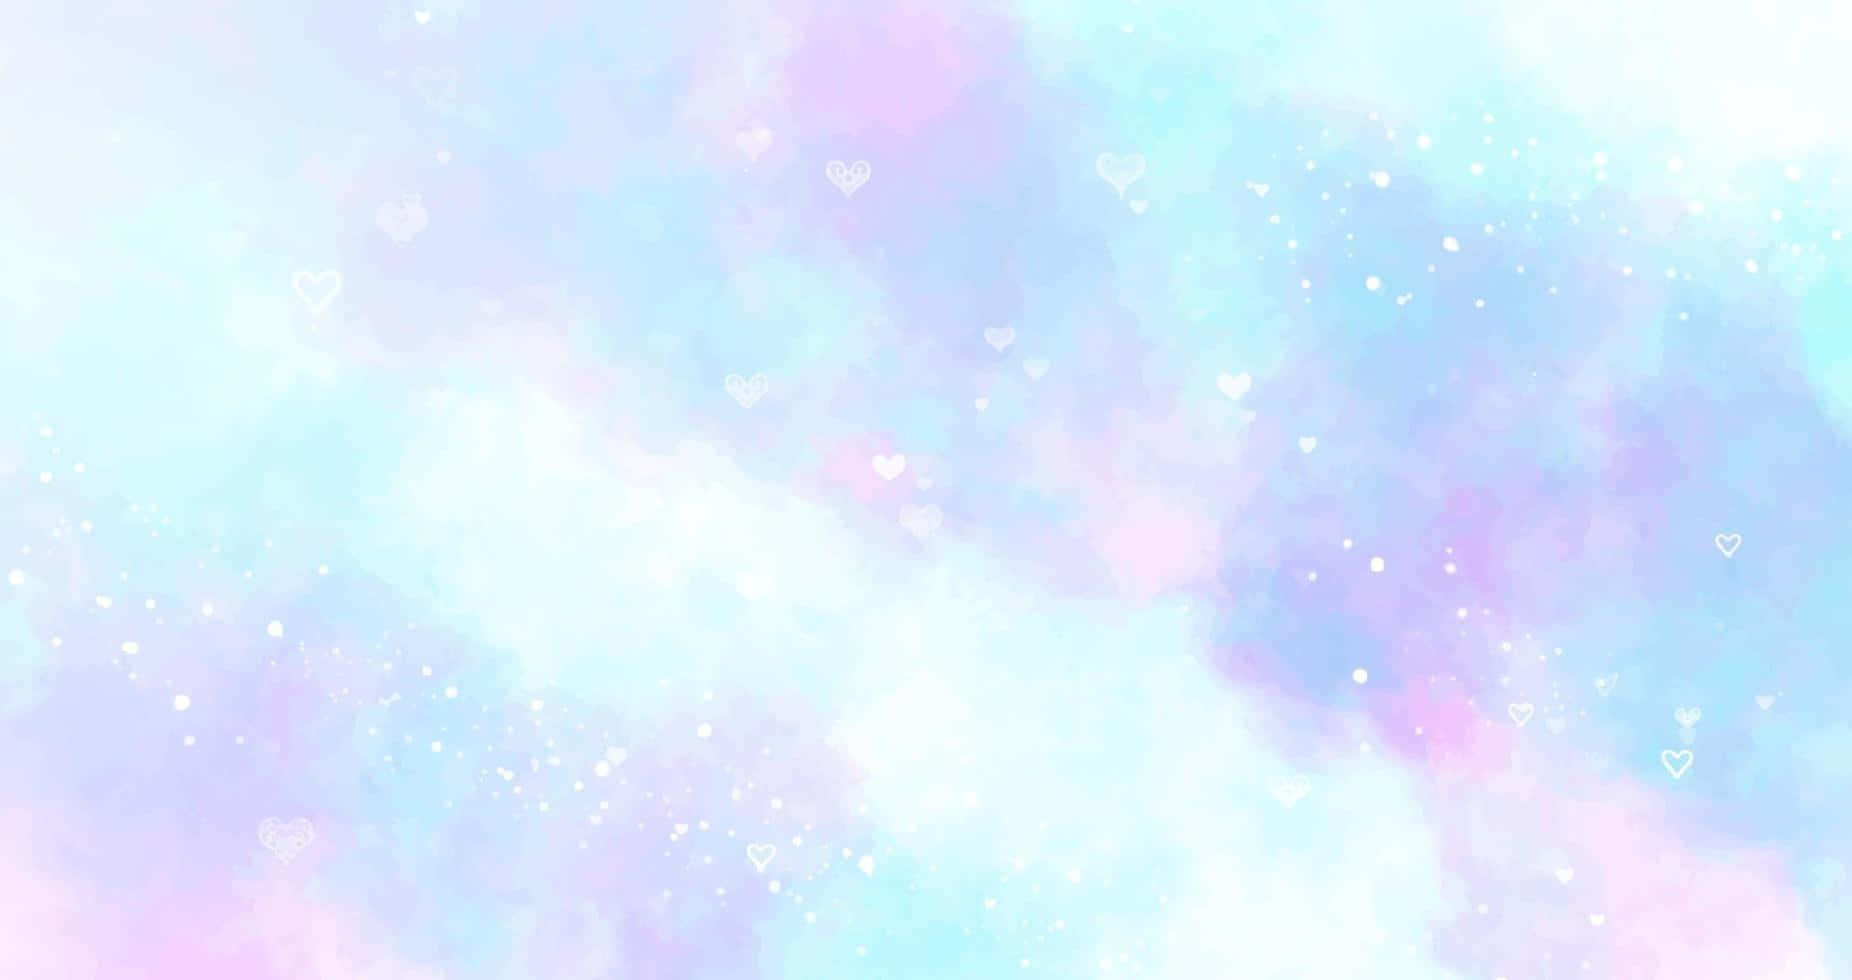 A Watercolor Background With Blue And Pink Stars